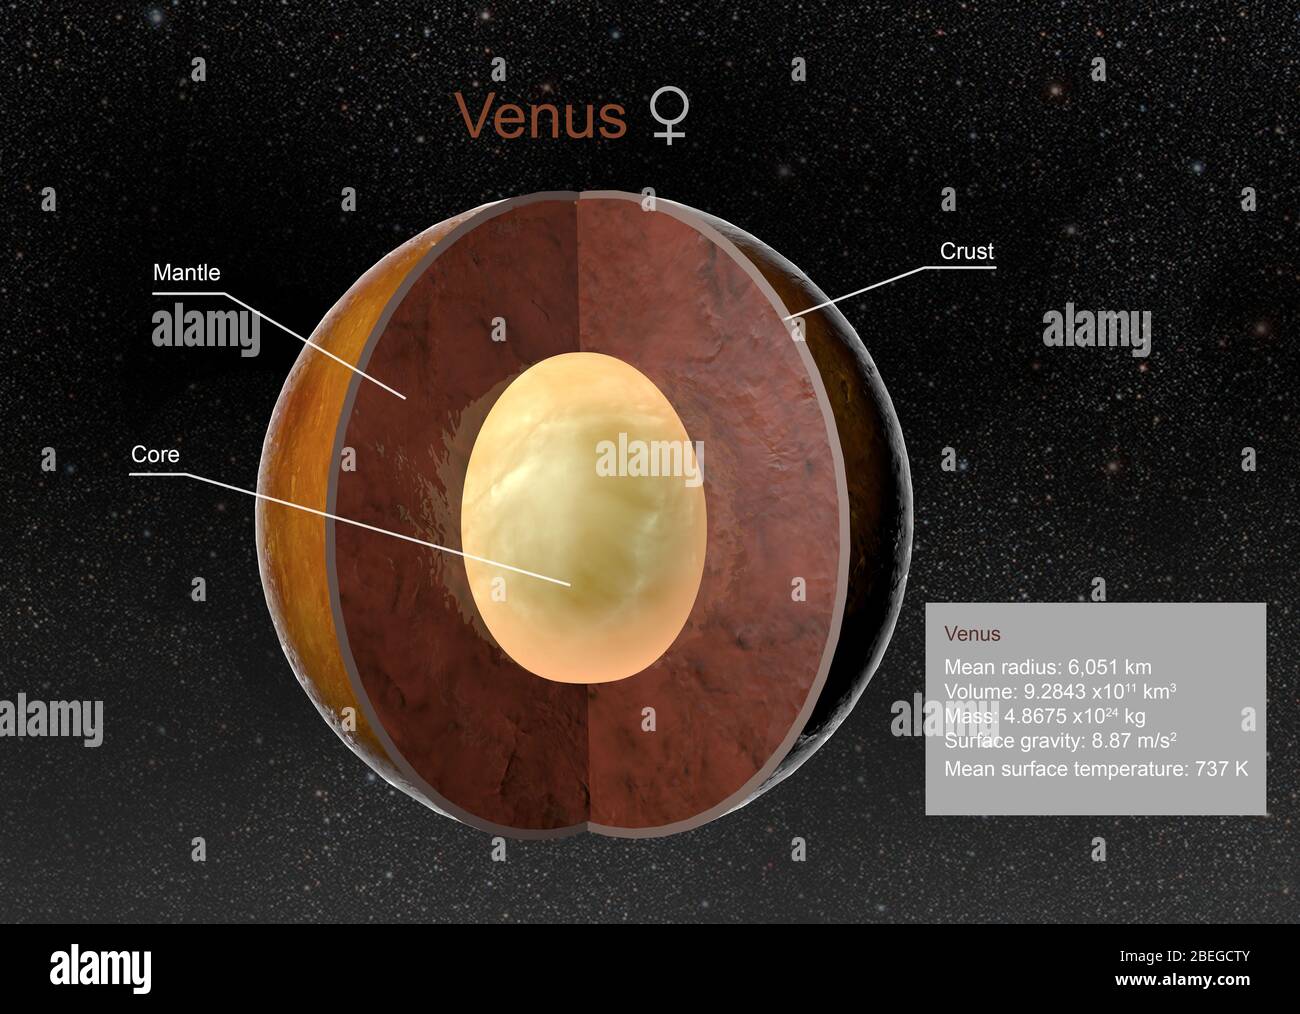 Illustration of the planet Venus. The crust, mantle and core are labeled in cutaway view. Also shown are facts relating to Venus' size, gravity and temperature. Stock Photo